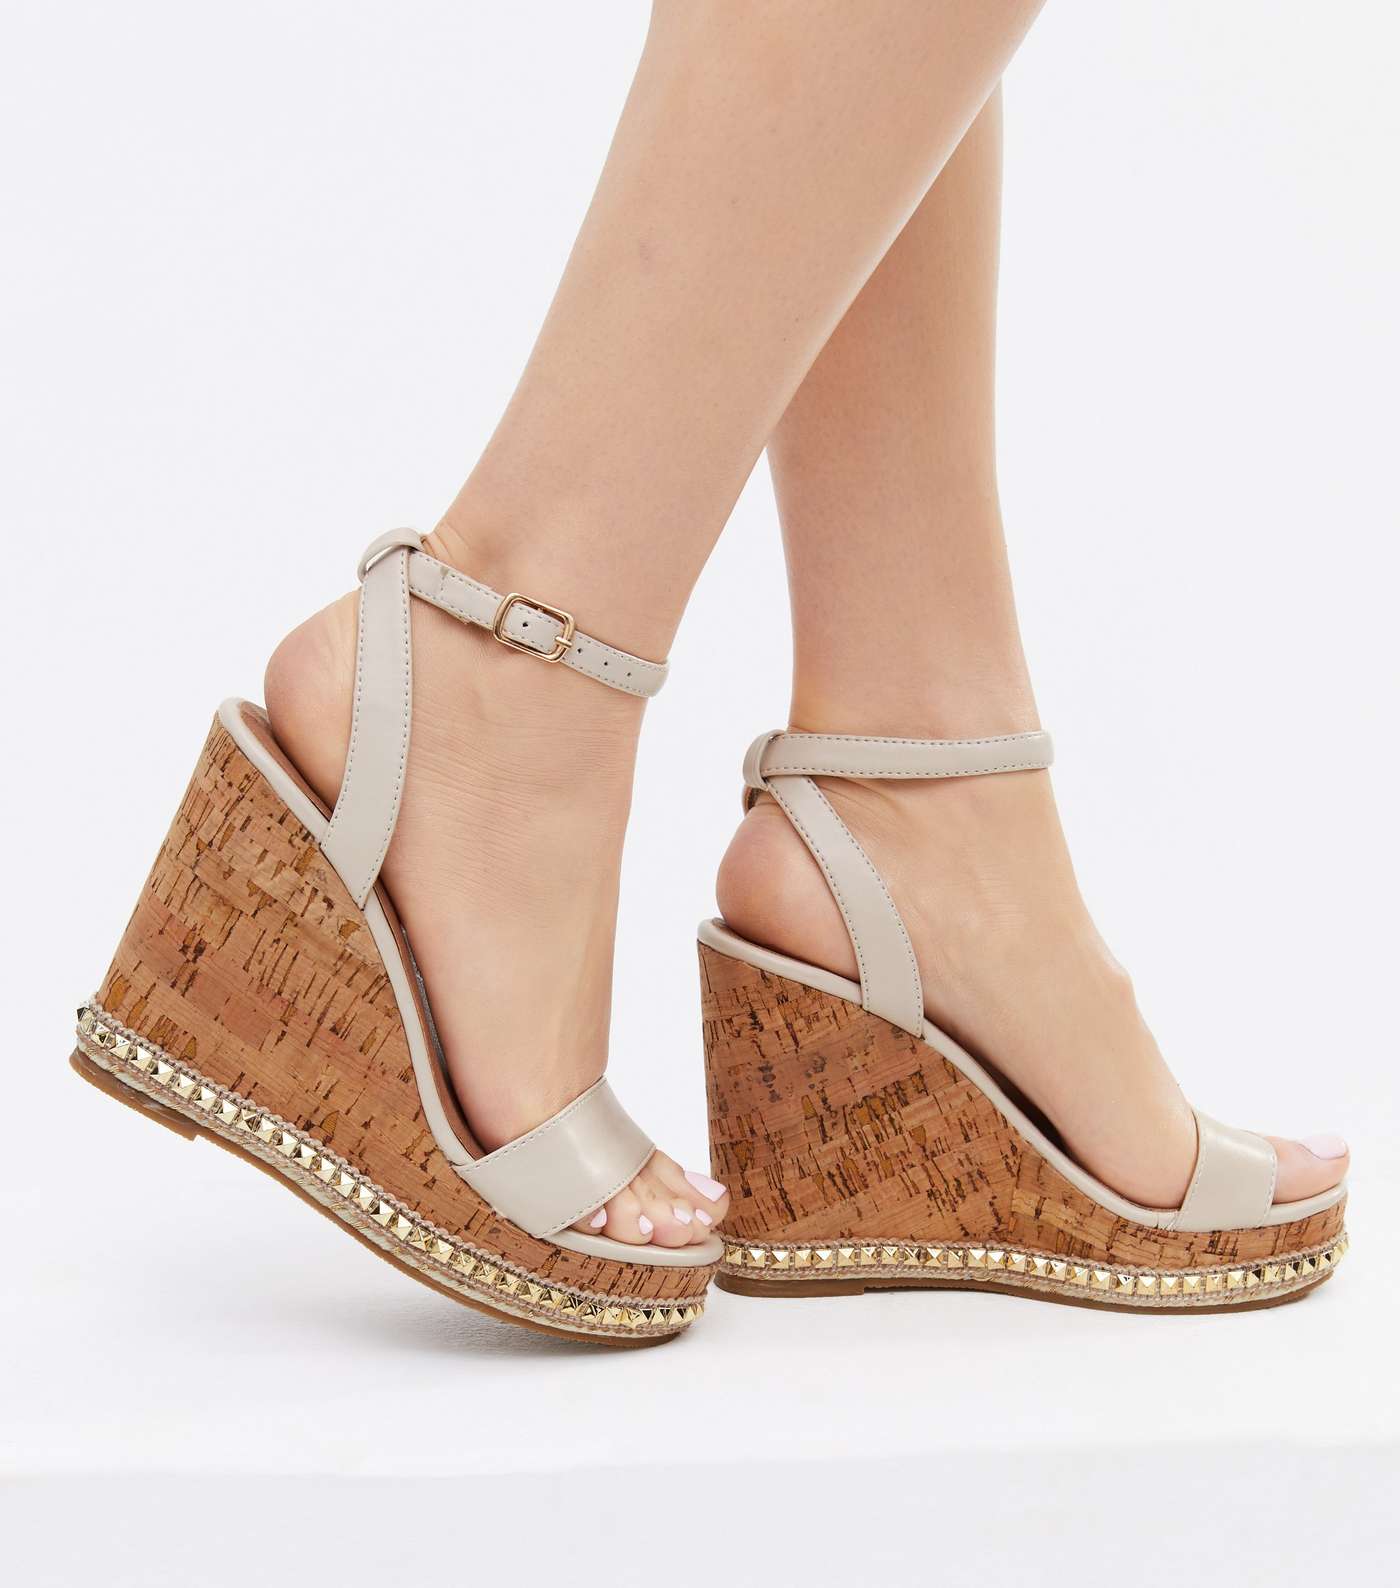 Off White Studded Faux Cork Wedge Heel Sandals Image 2